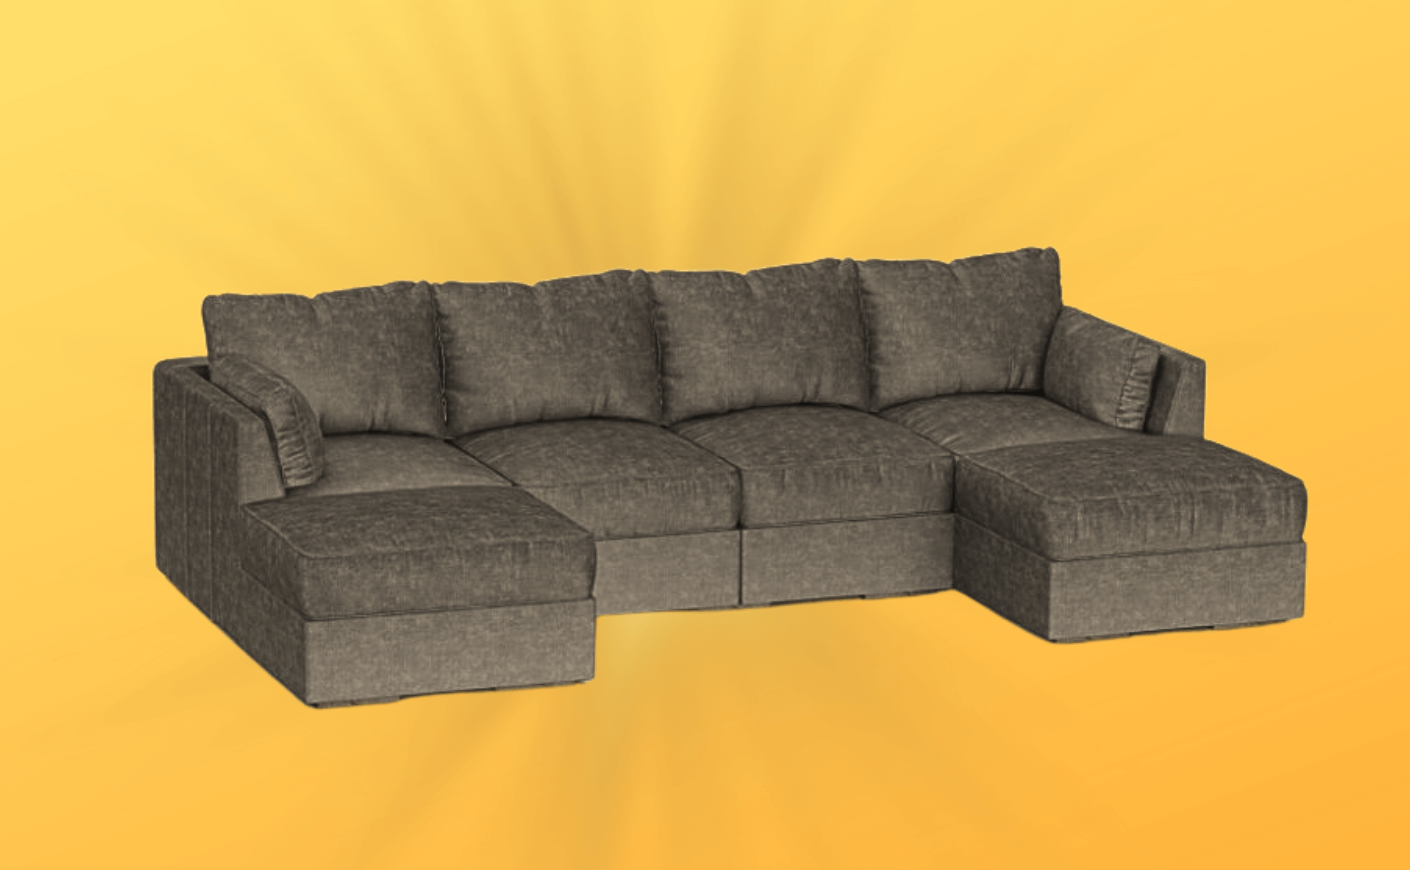 Lovesac Sactional Couch Review